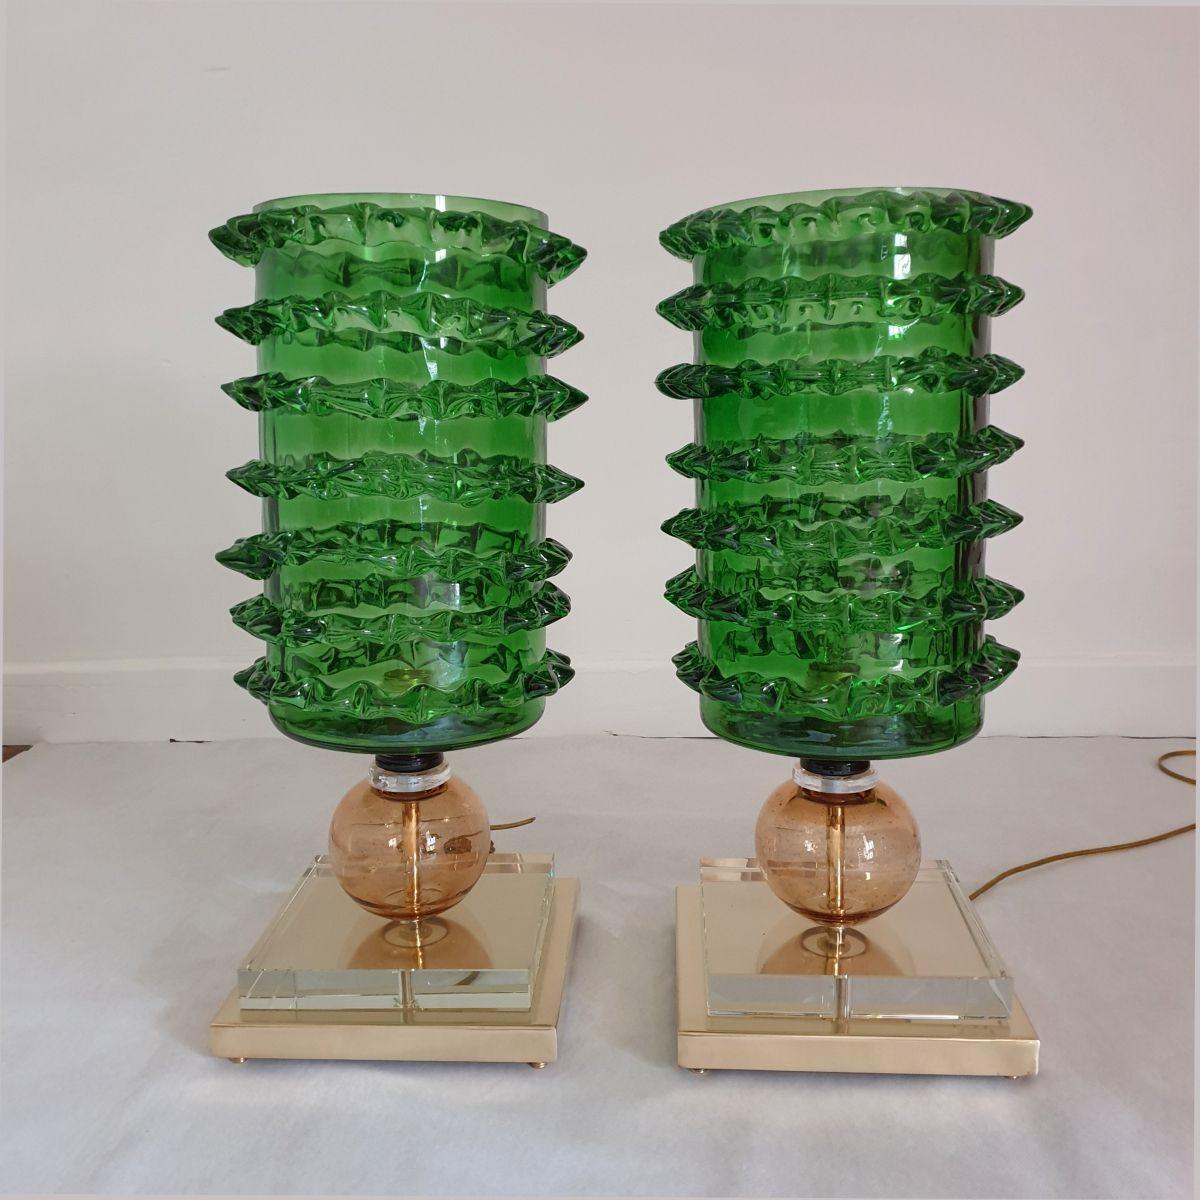 Pair of Mid Century Modern Murano glass and brass lamps, Barovier & Toso style Italy 1980s.
The Mid-Century table lamps are made of a green Rostrato Murano glass shade, nesting the light: irregular and thick Murano handmade decor.
The Italian lamps